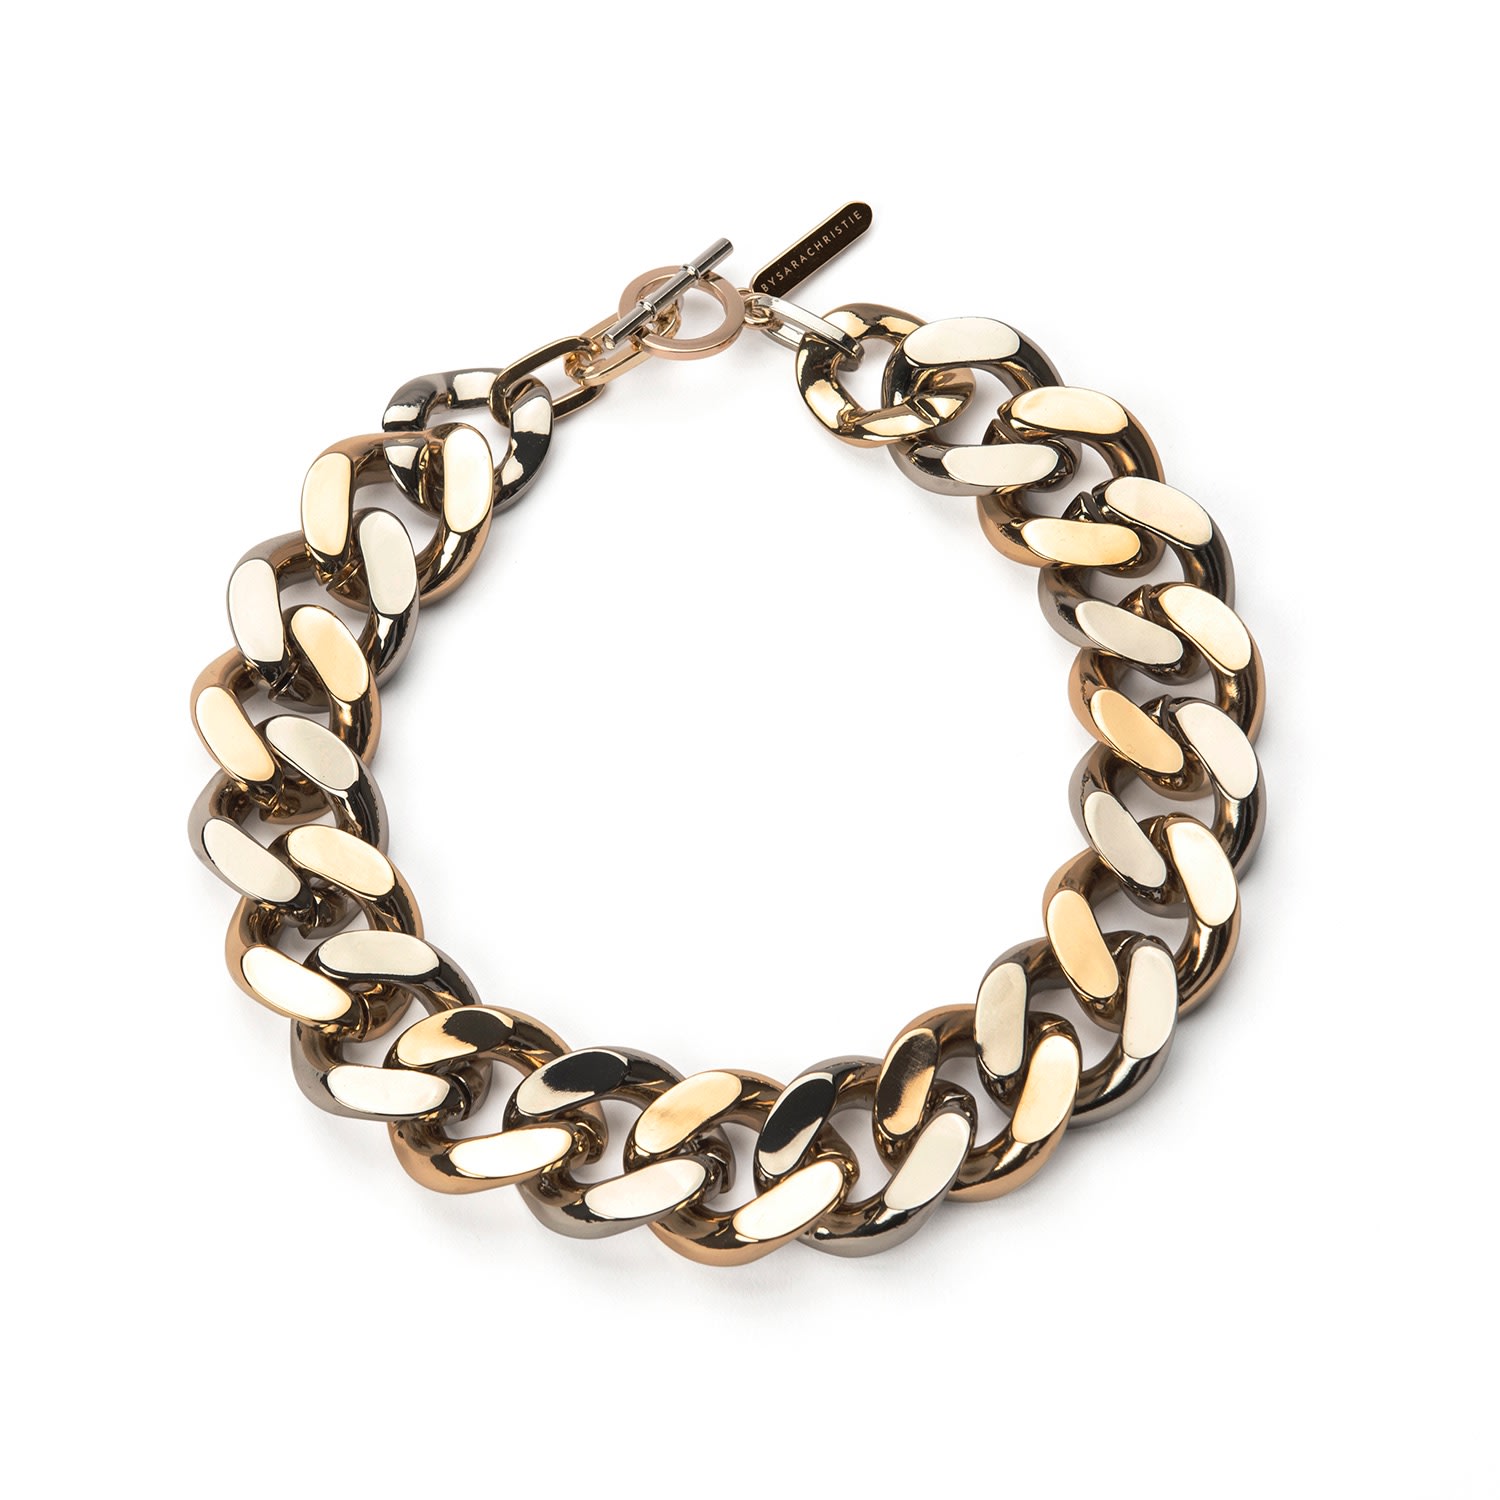 Women’s Gold / Silver The Boss Chain Necklace - Gold, Silver Bysarachristie